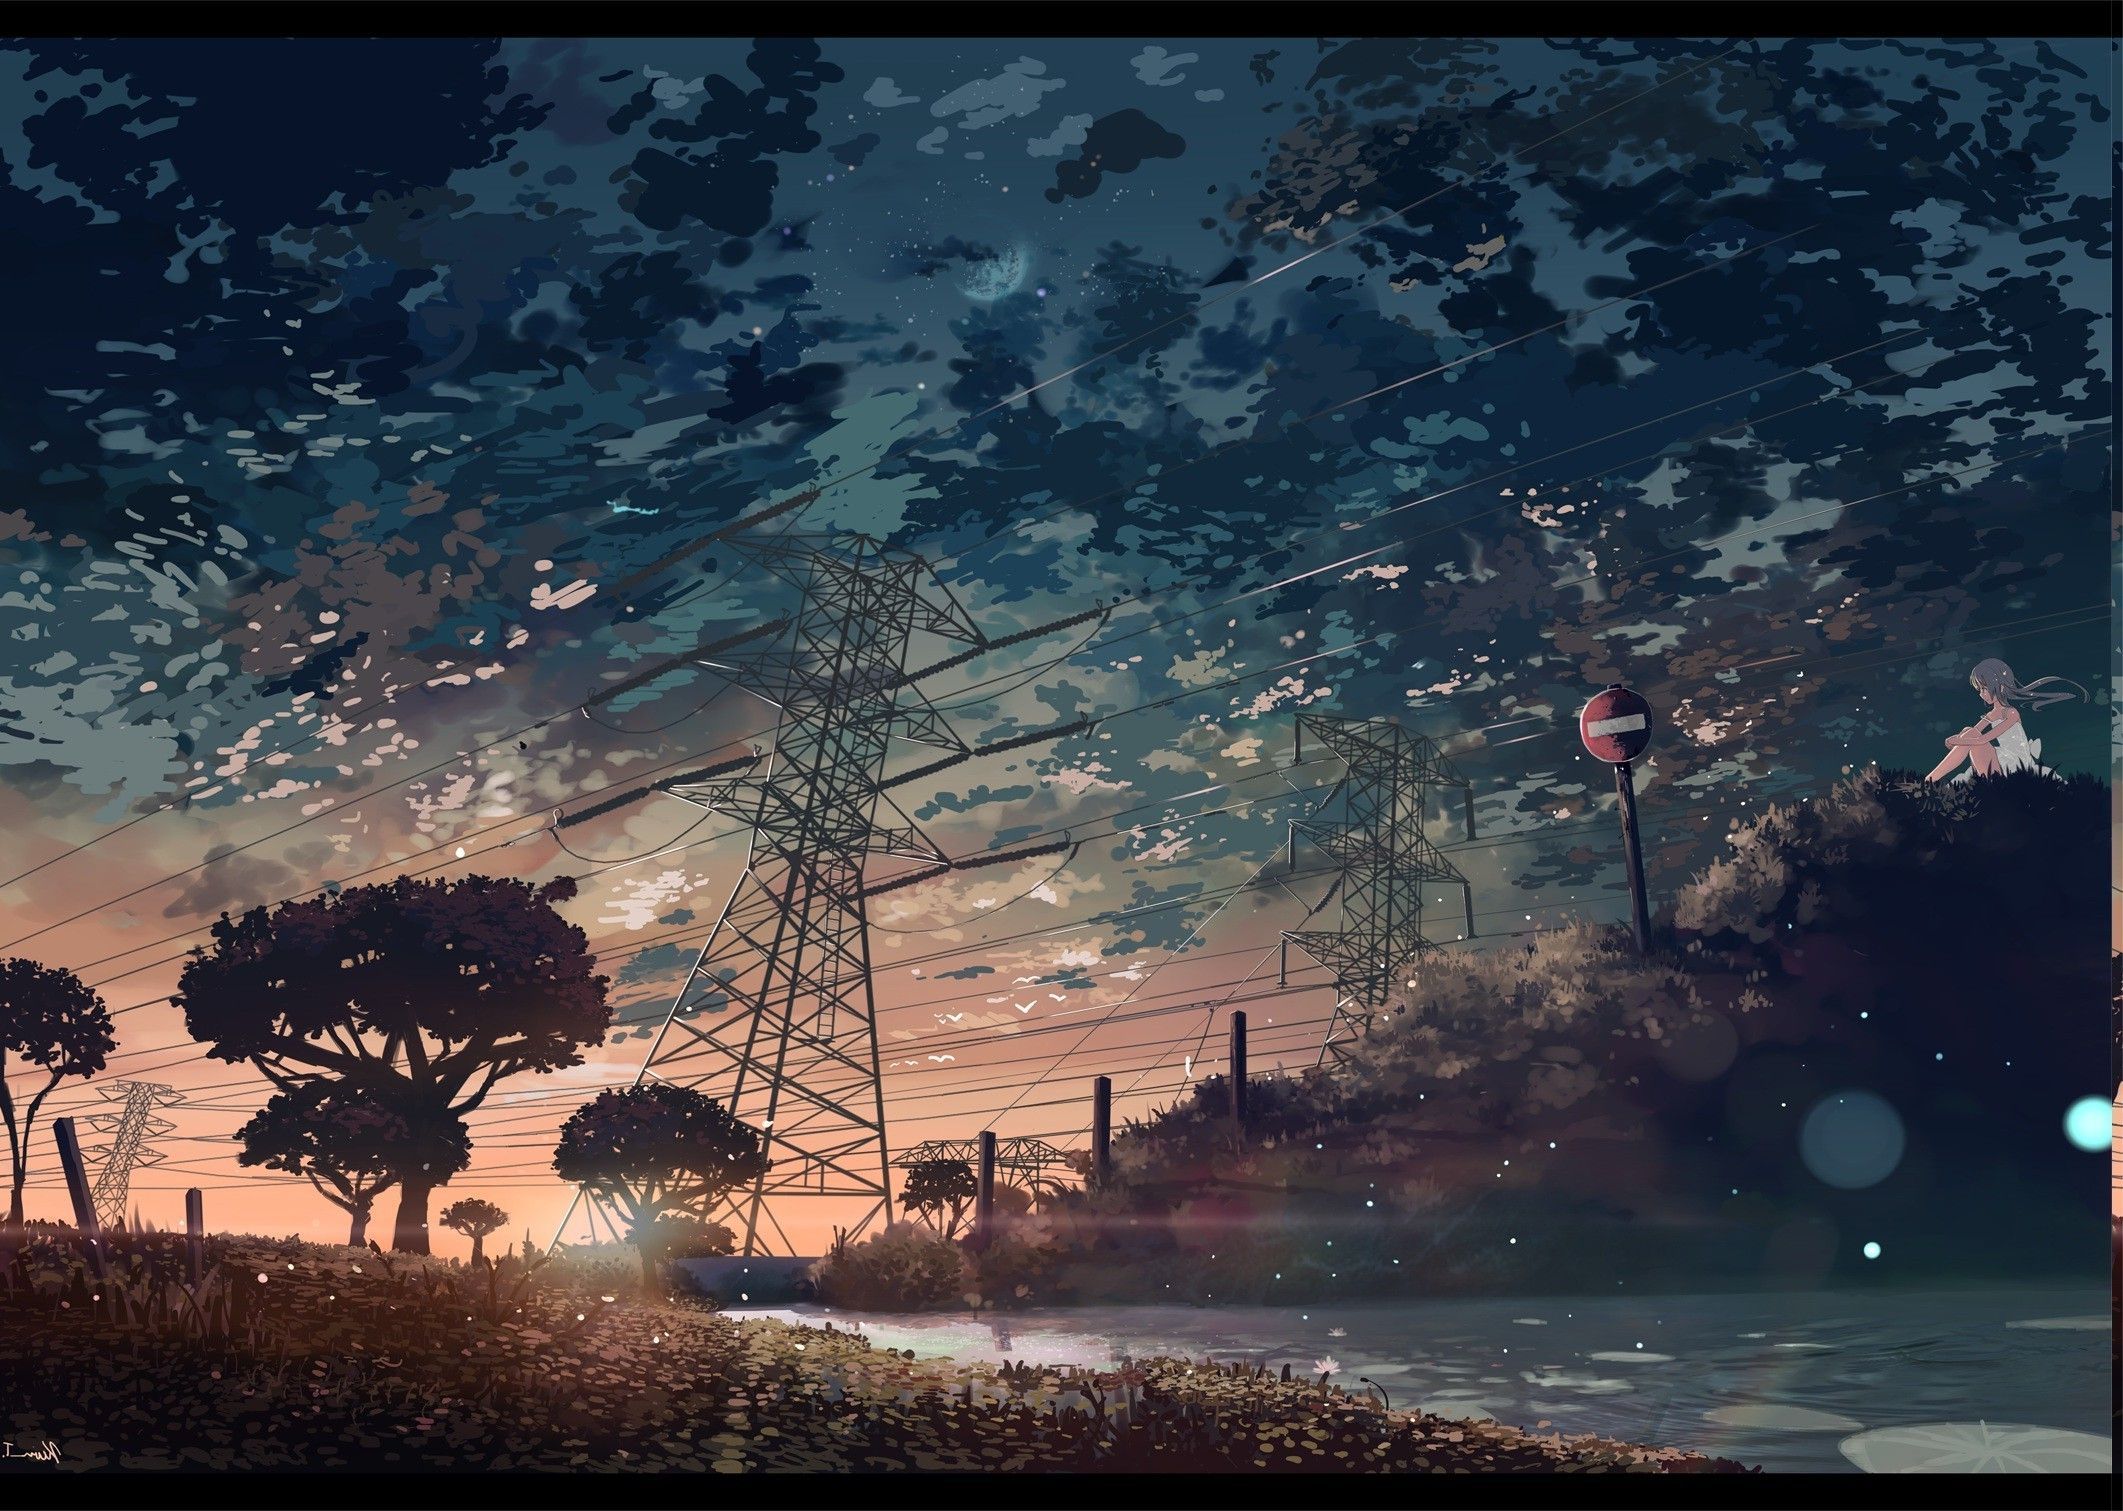 A painting of an electric tower in the sky - Landscape, vintage, anime, retro, scenery, nature, anime sunset